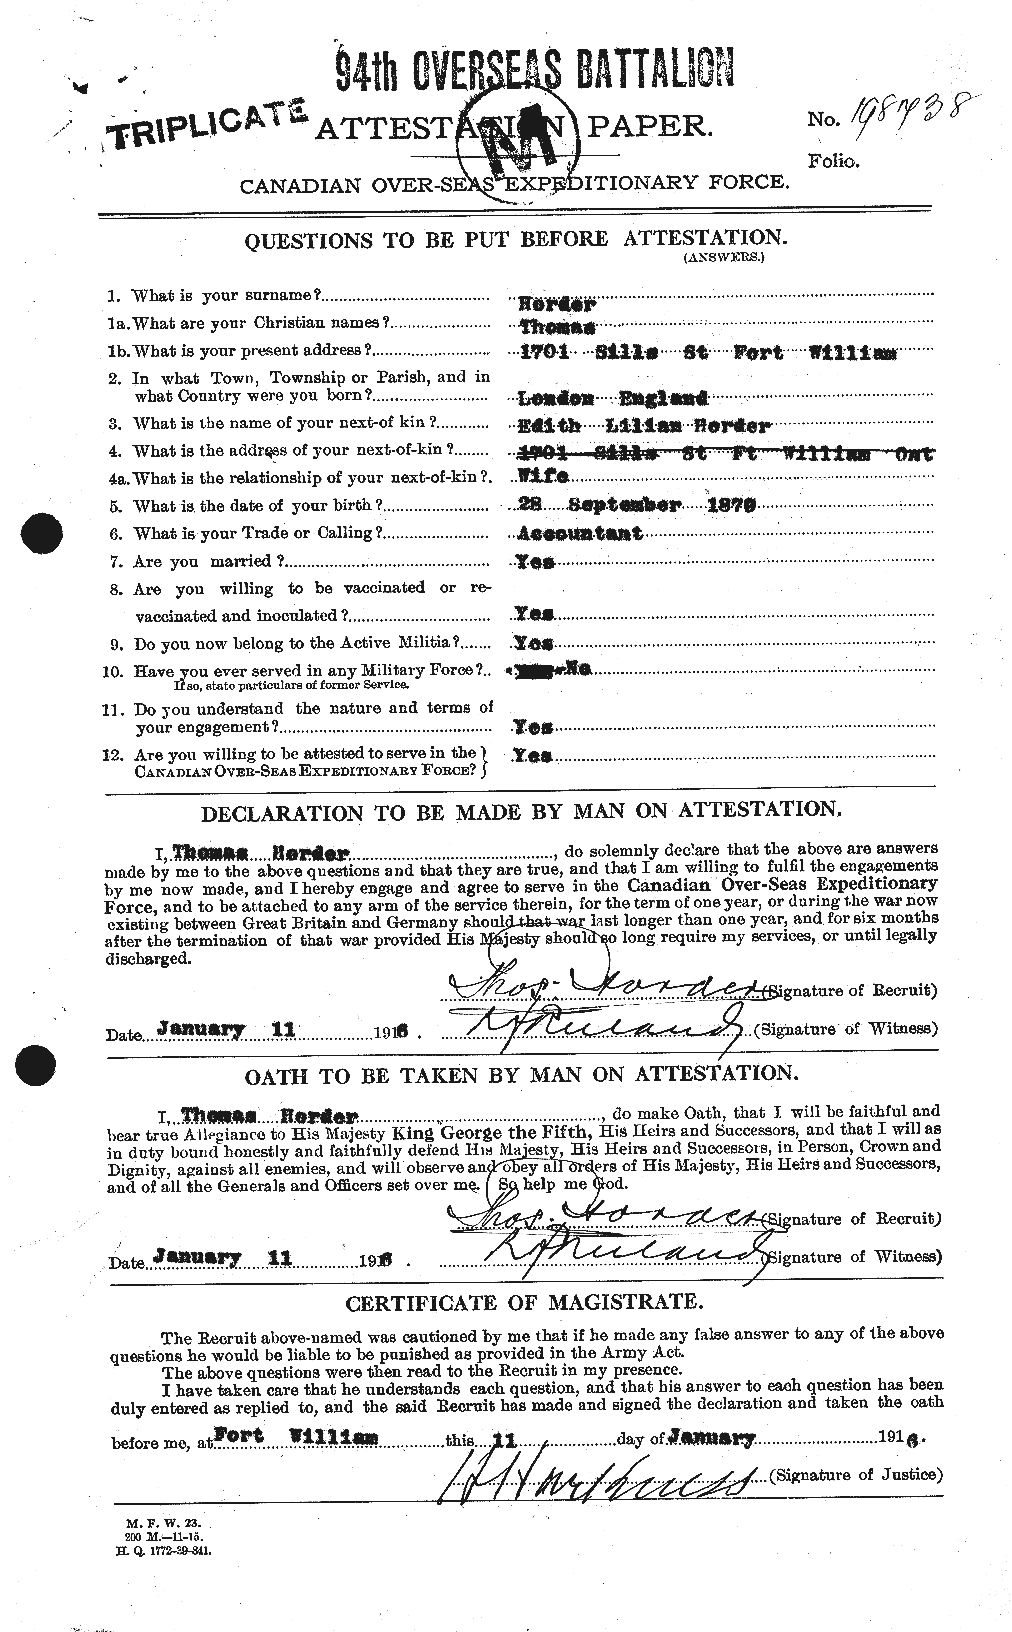 Personnel Records of the First World War - CEF 397455a